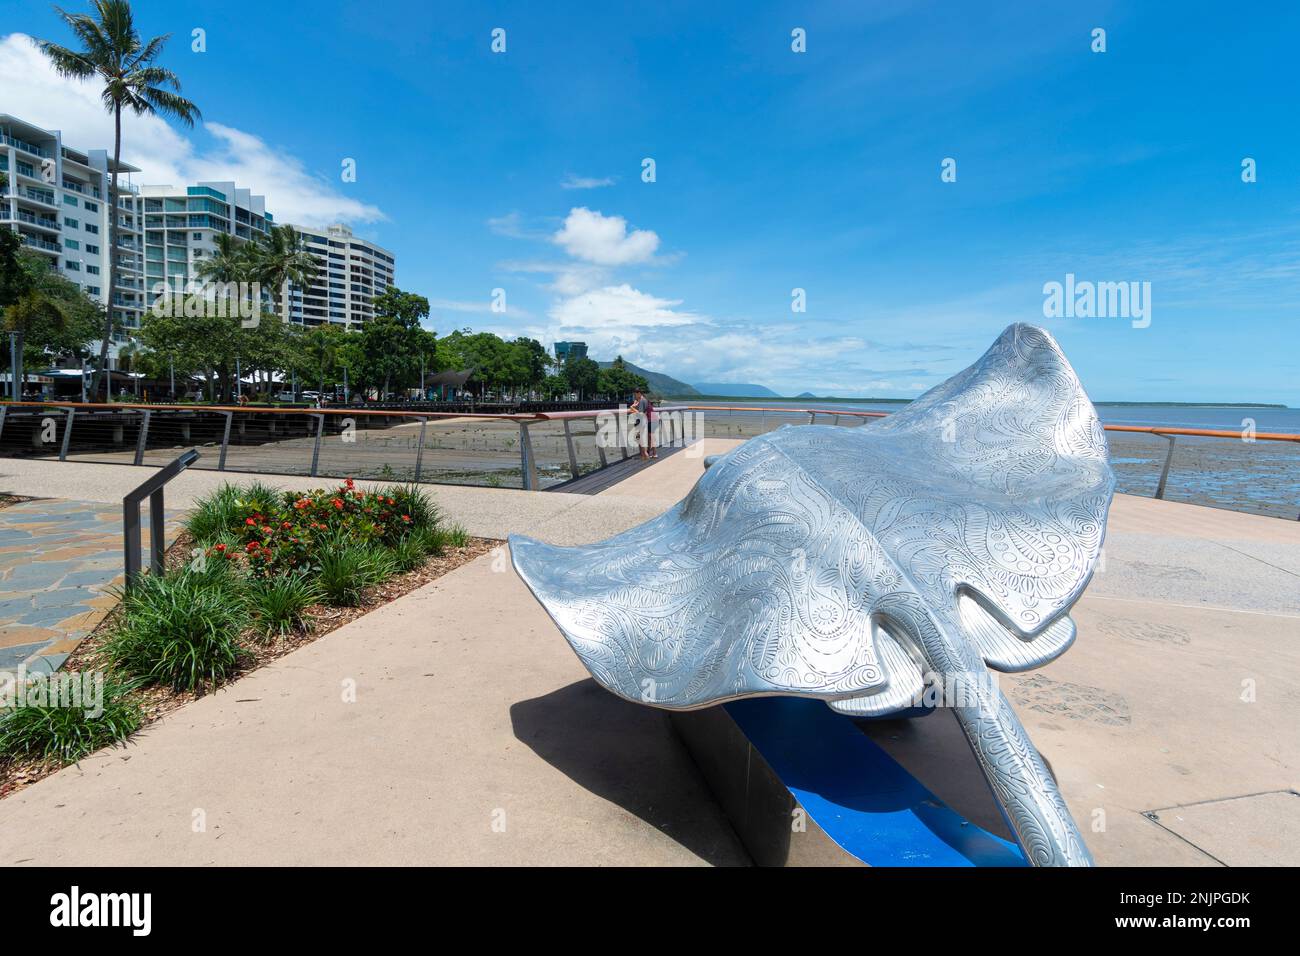 Giant Stingray is part of indigenous artist Brian Robinson's Citizens Gateway to the Great Barrier Reef, Cairns Esplanade, Far North Queensland, FNQ, Stock Photo